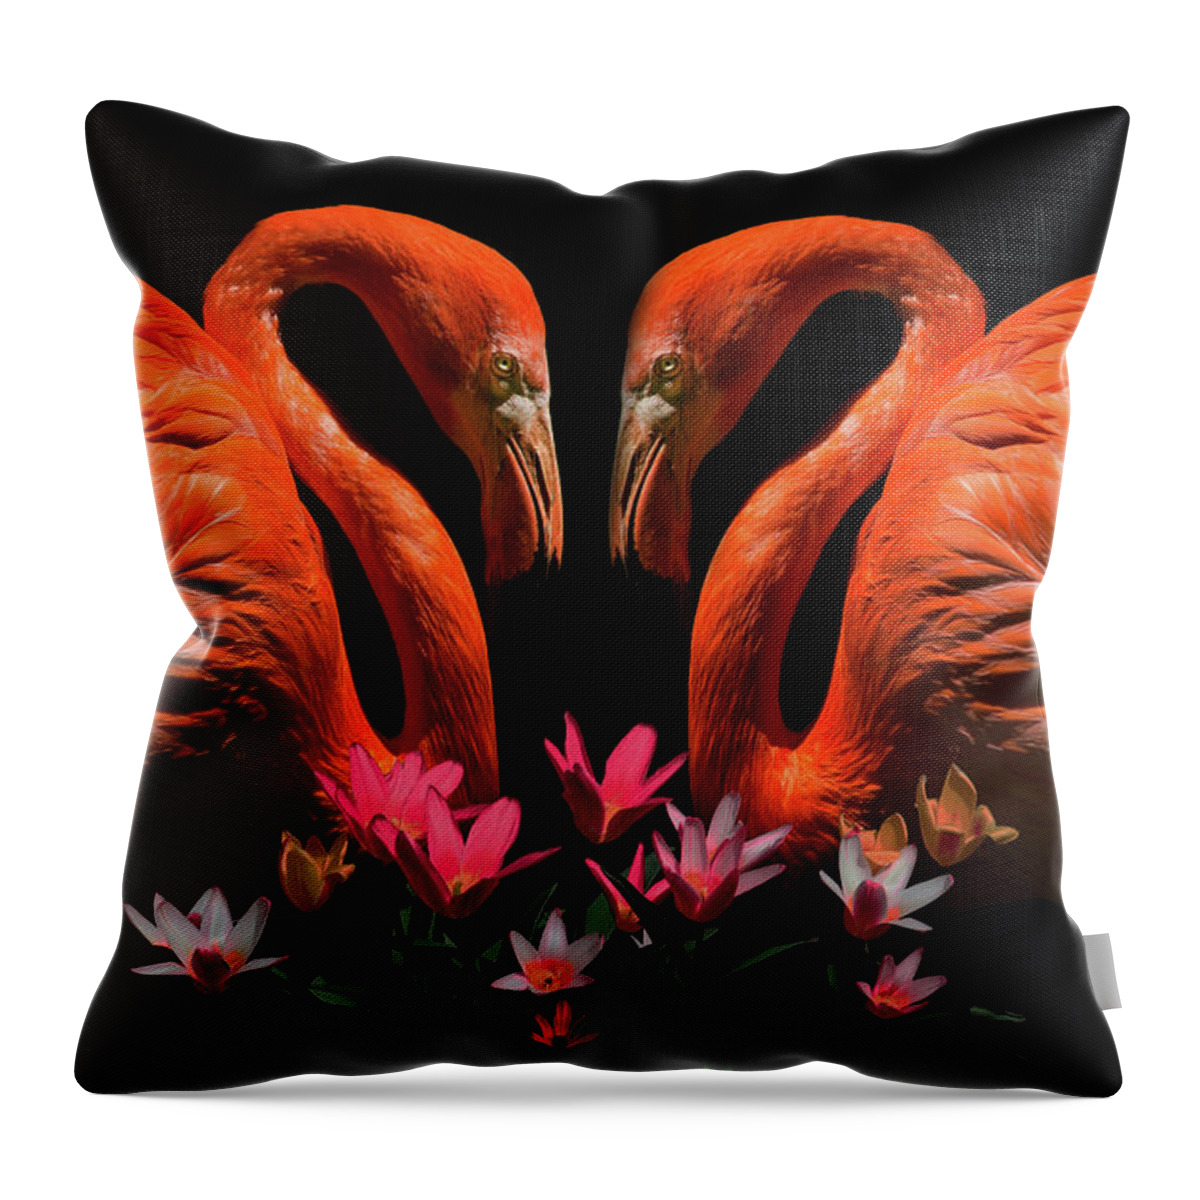 Animals Throw Pillow featuring the digital art True Love Times Two by Debra and Dave Vanderlaan